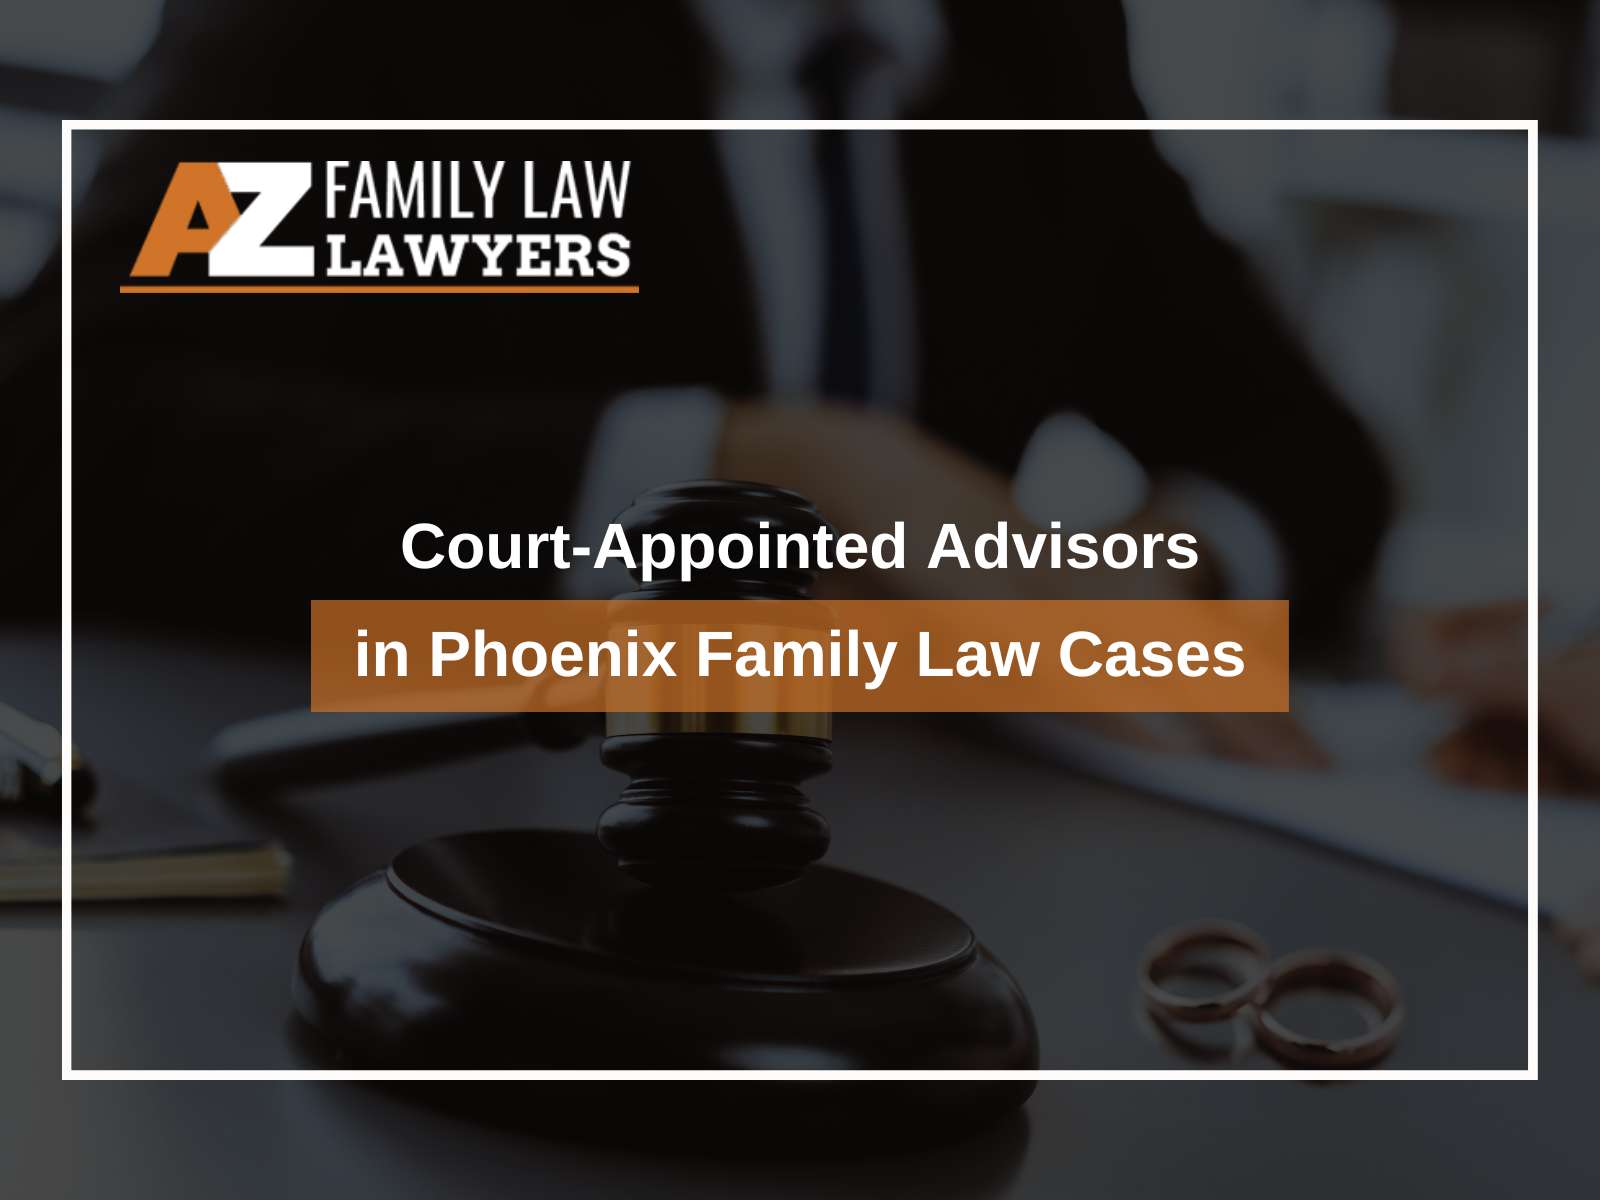 Court-Appointed Advisors in Phoenix Family Law Cases